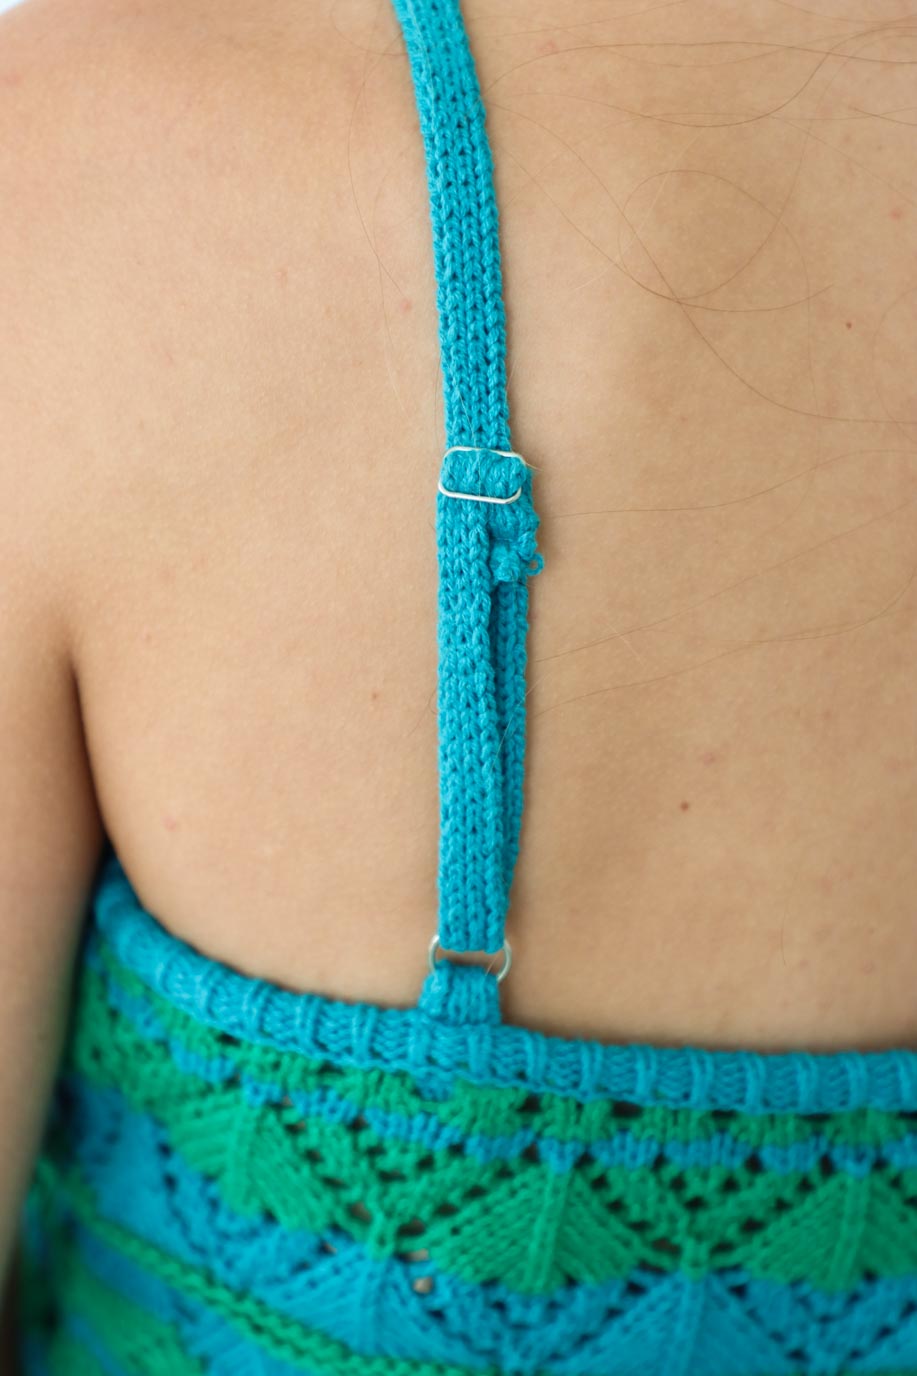 adjustable strap on blue and green crochet knit tank top